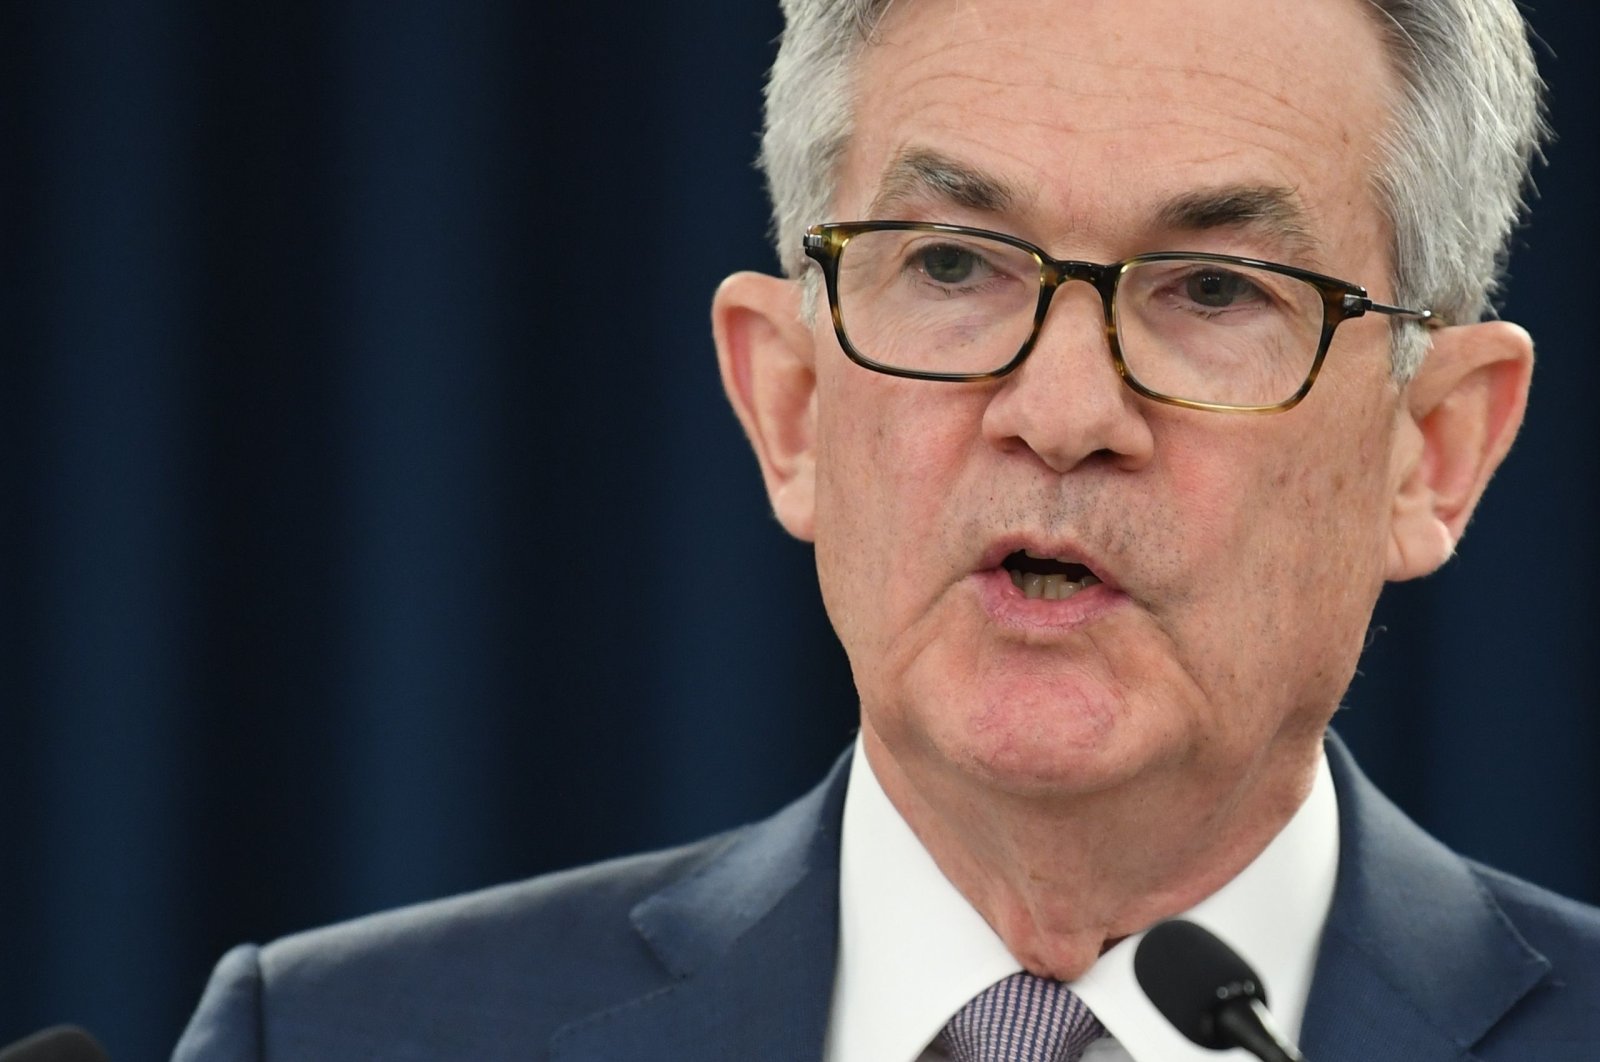 U.S. Federal Reserve Chairman Jerome Powell gives a press briefing in Washington, D.C., U.S., March 3, 2020. (AFP Photo)